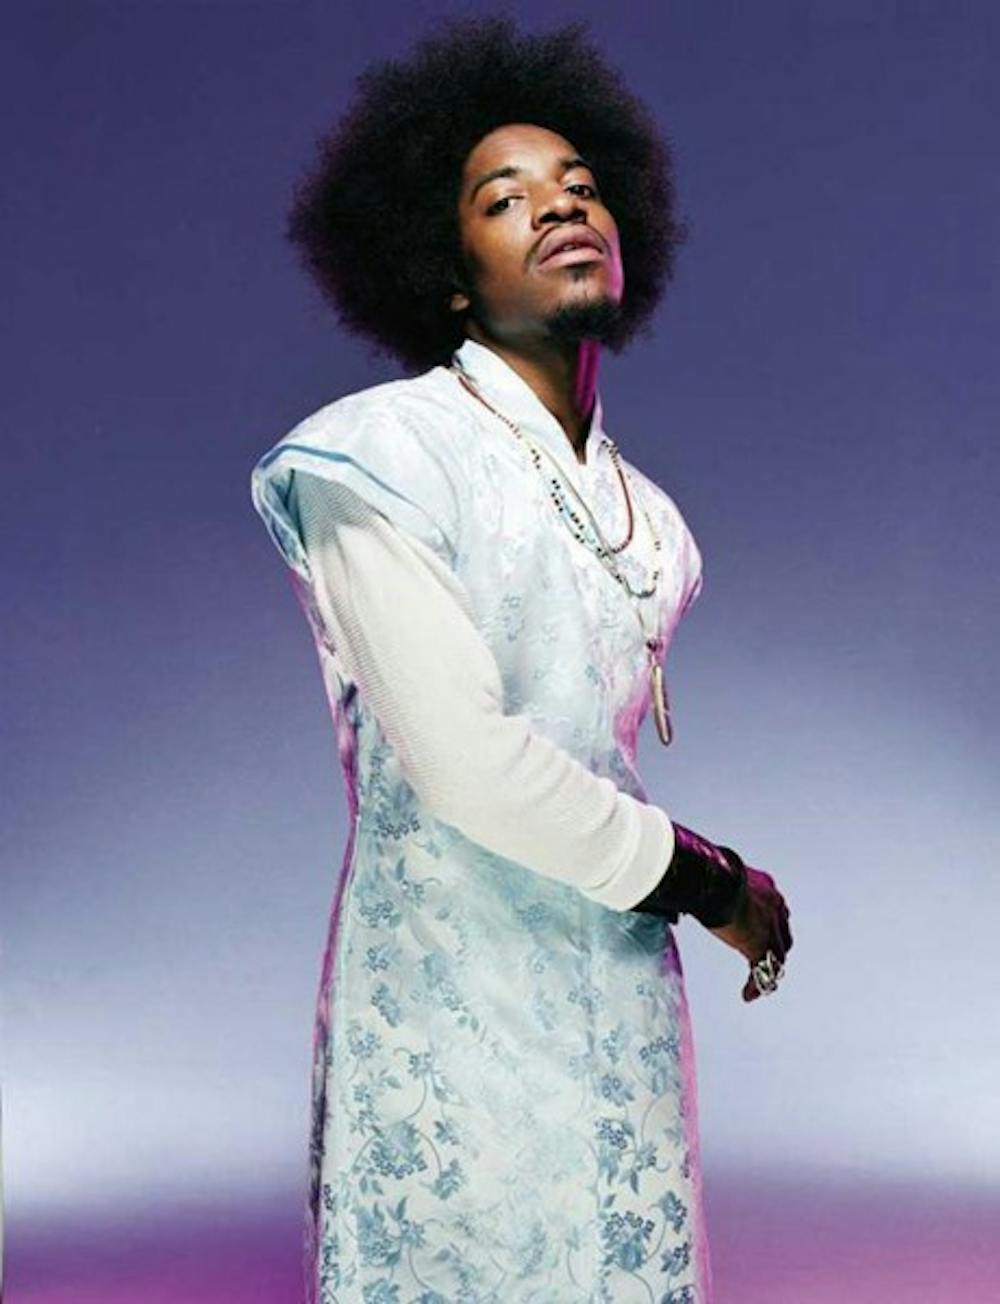 UNDERGROUND KING: Andre 3000, half of the popular group OutKast, is one of the most recognizable names in the underground hip-hop scene.  While OutKast has gained mainstream success, Andre 3000 is still widely respected among many underground hip-hop acts. (Courtesy of OutKast)